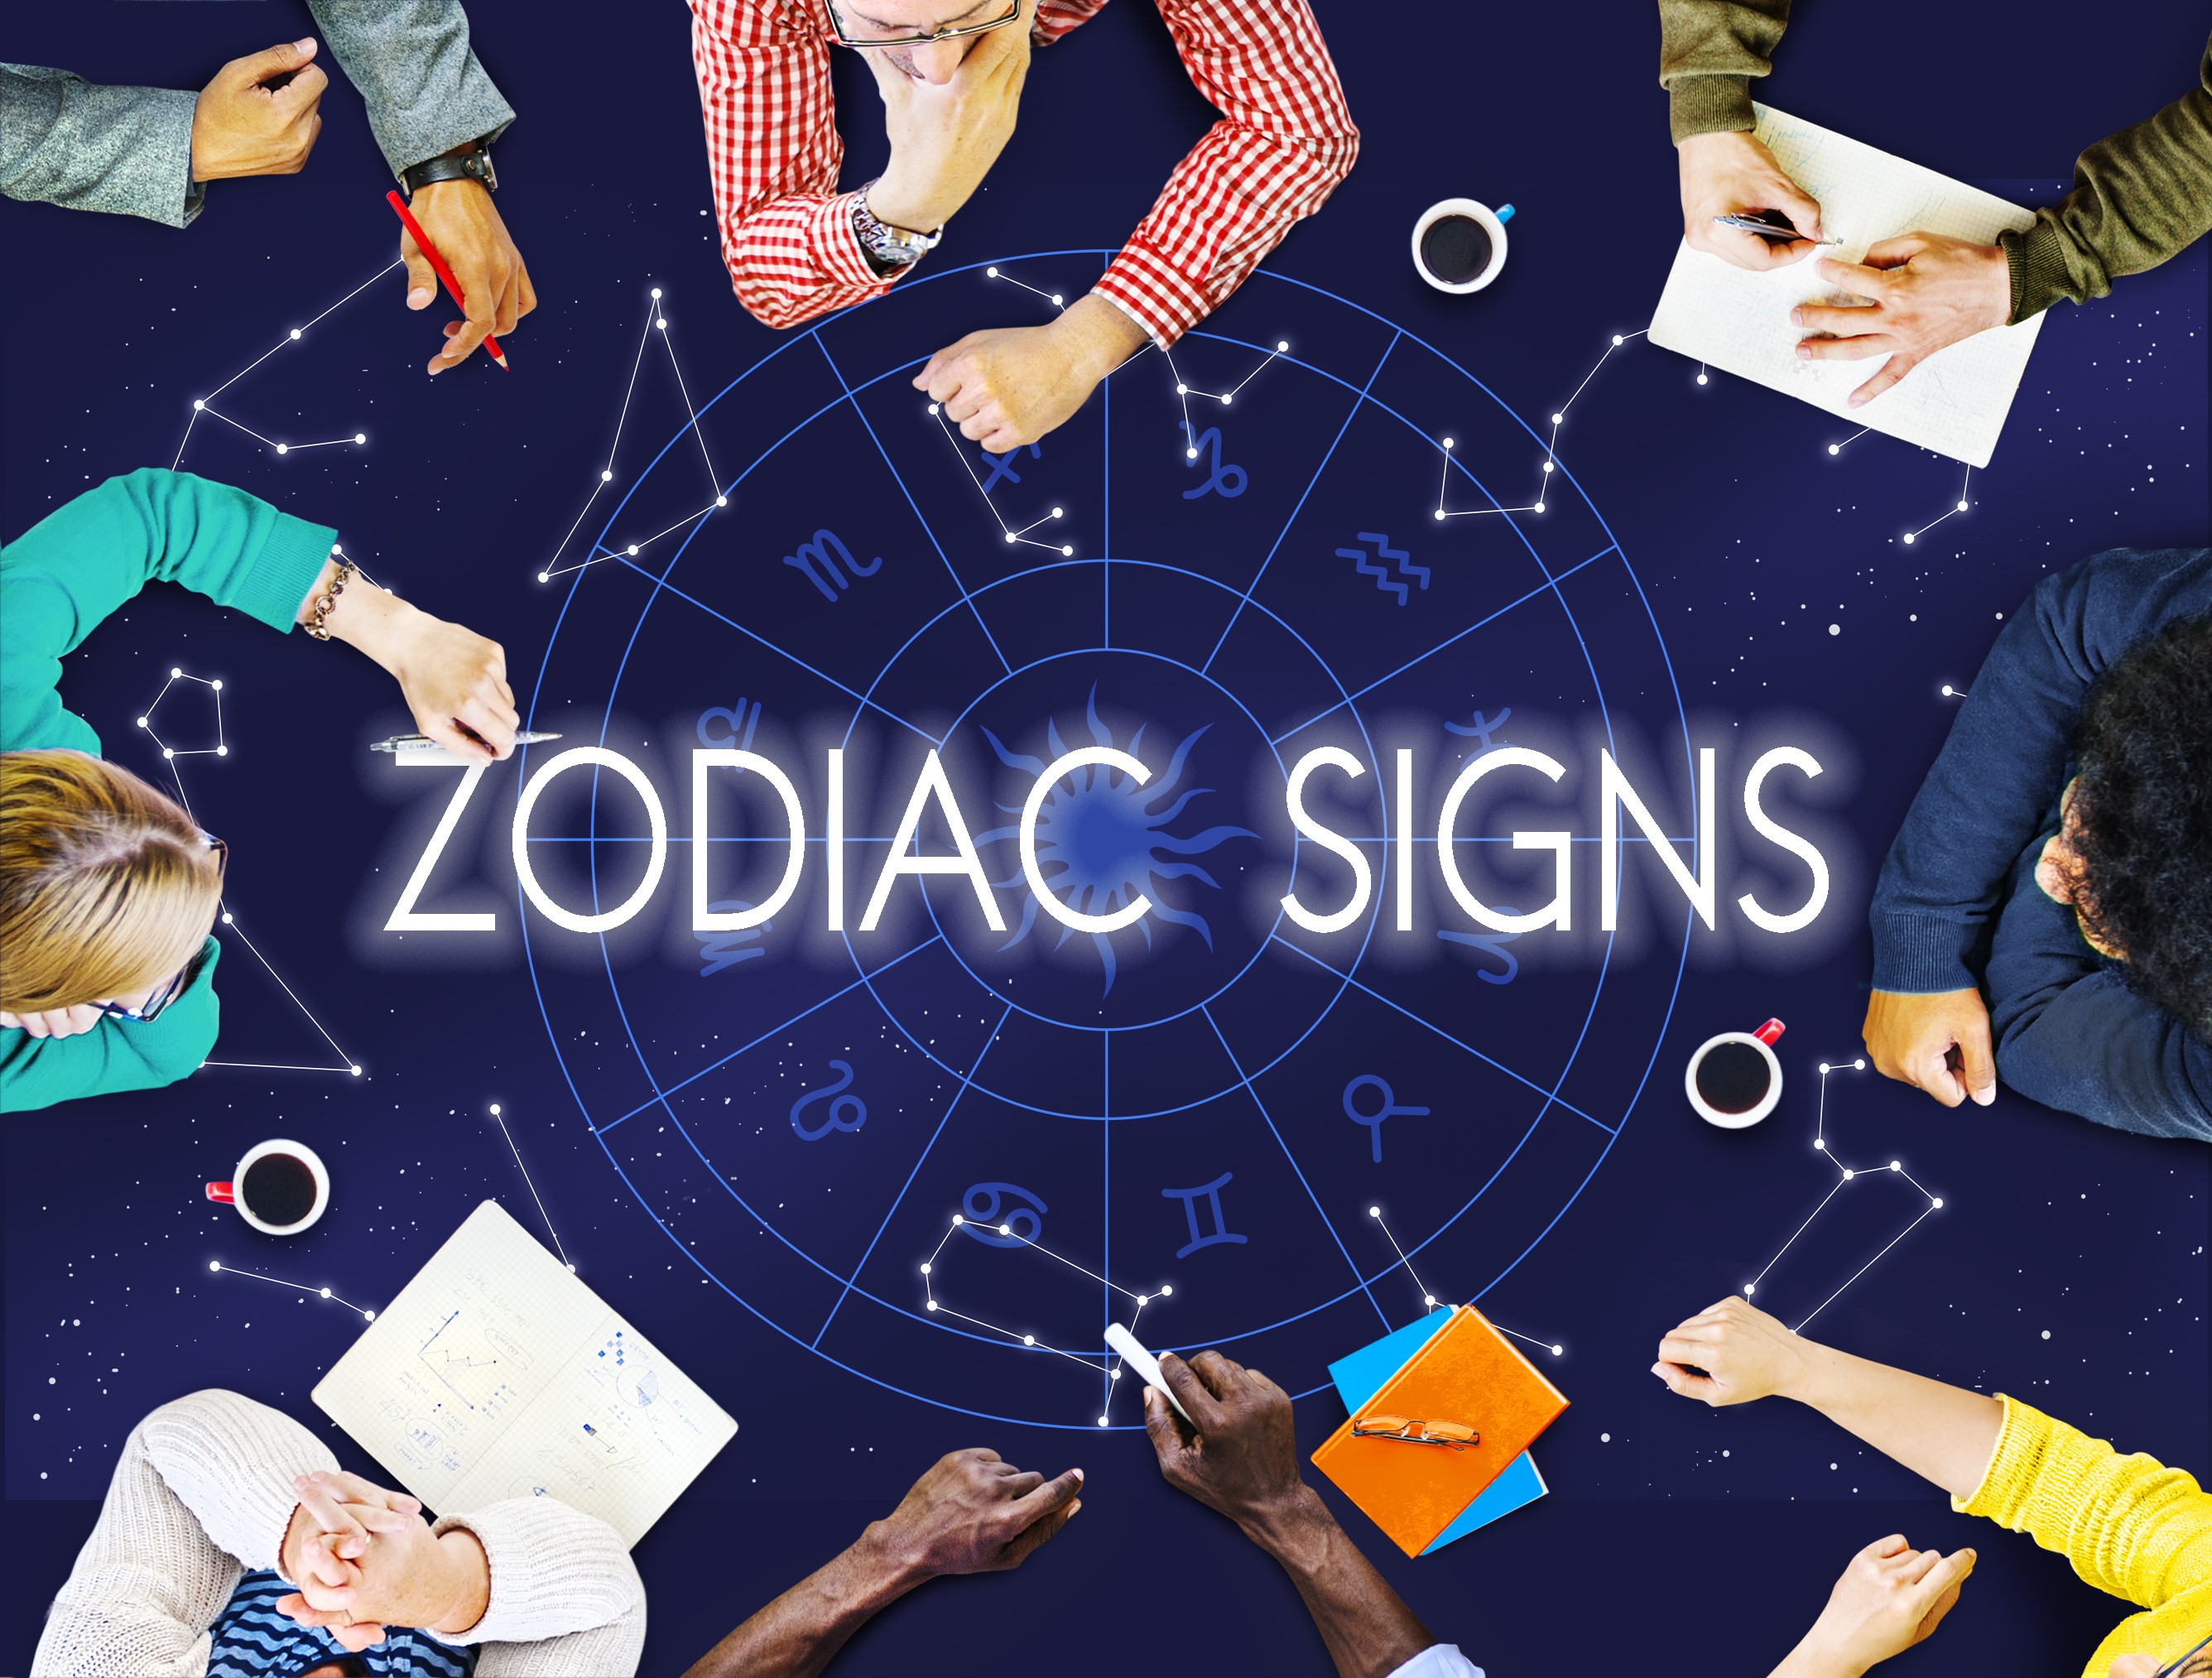 How To Negotiate And Win Your Way With Each Zodiac Sign